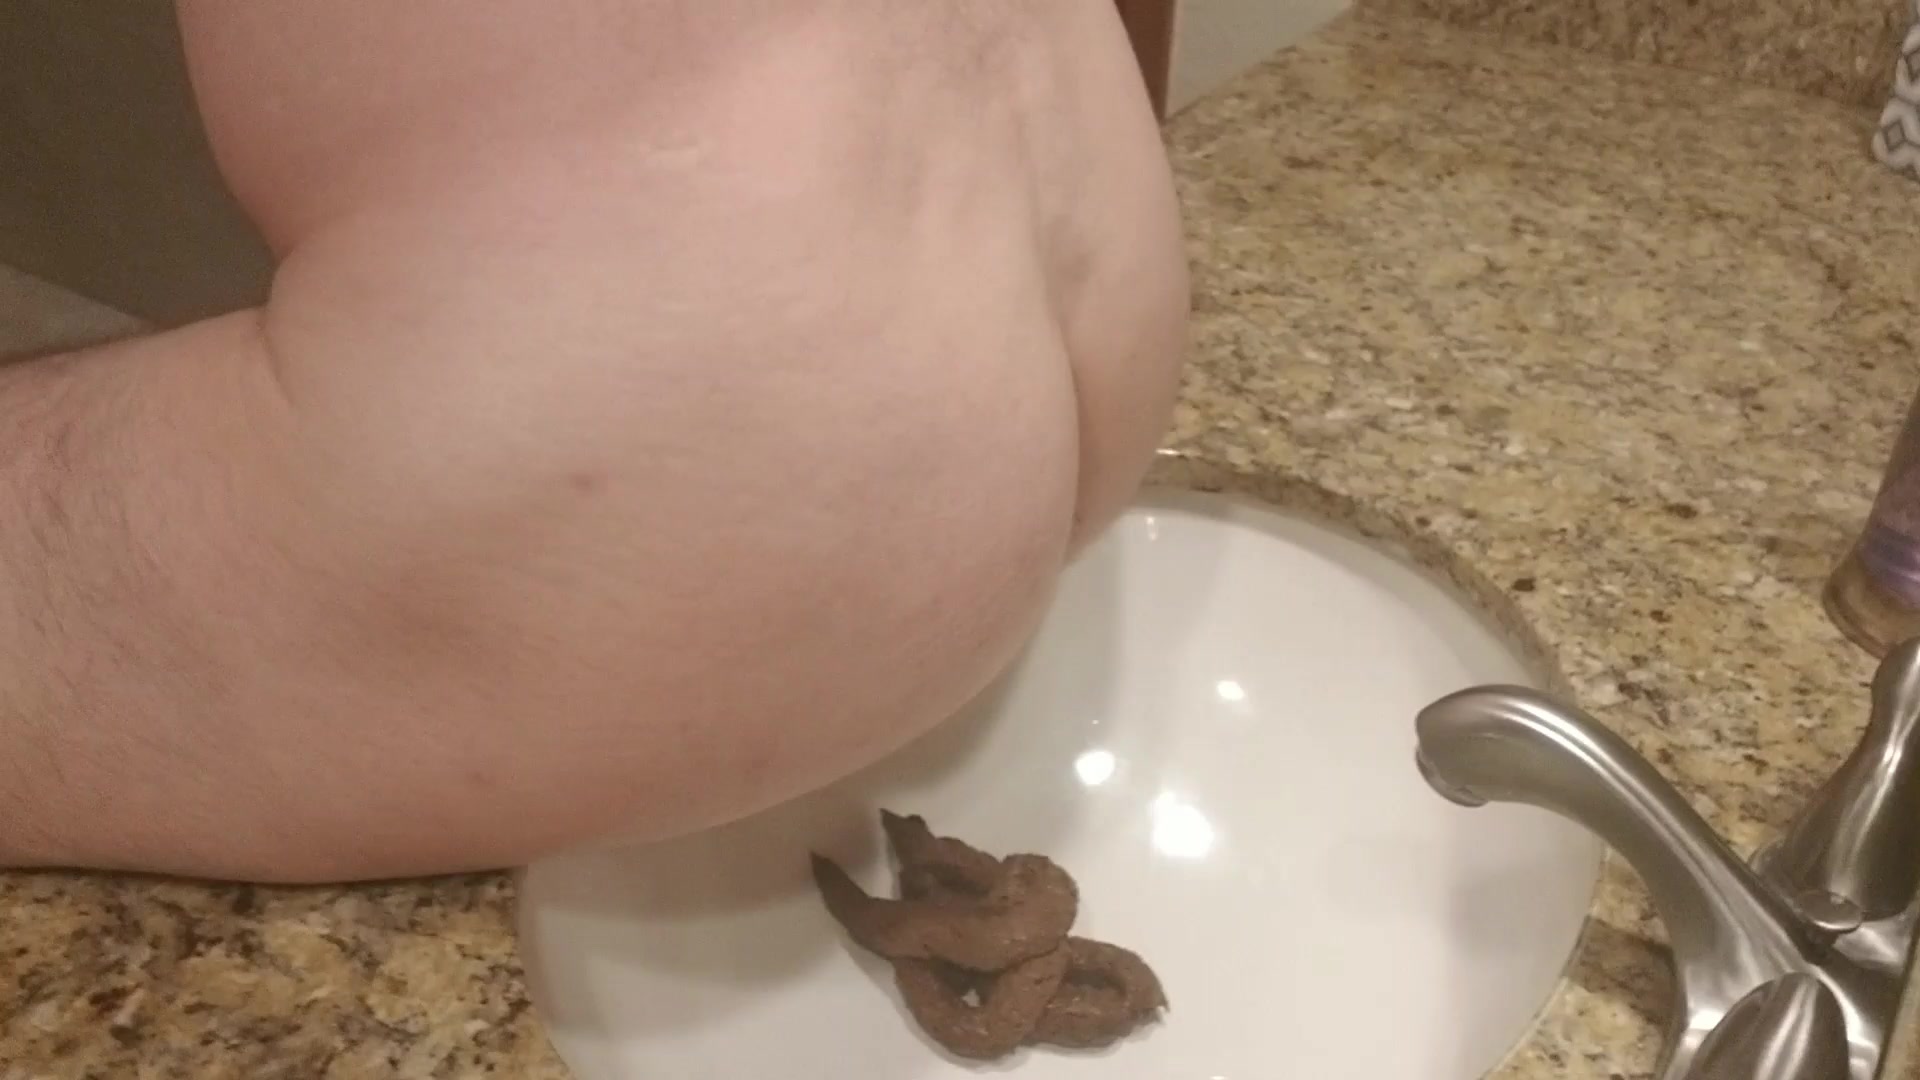 quick shit in the hotel sink